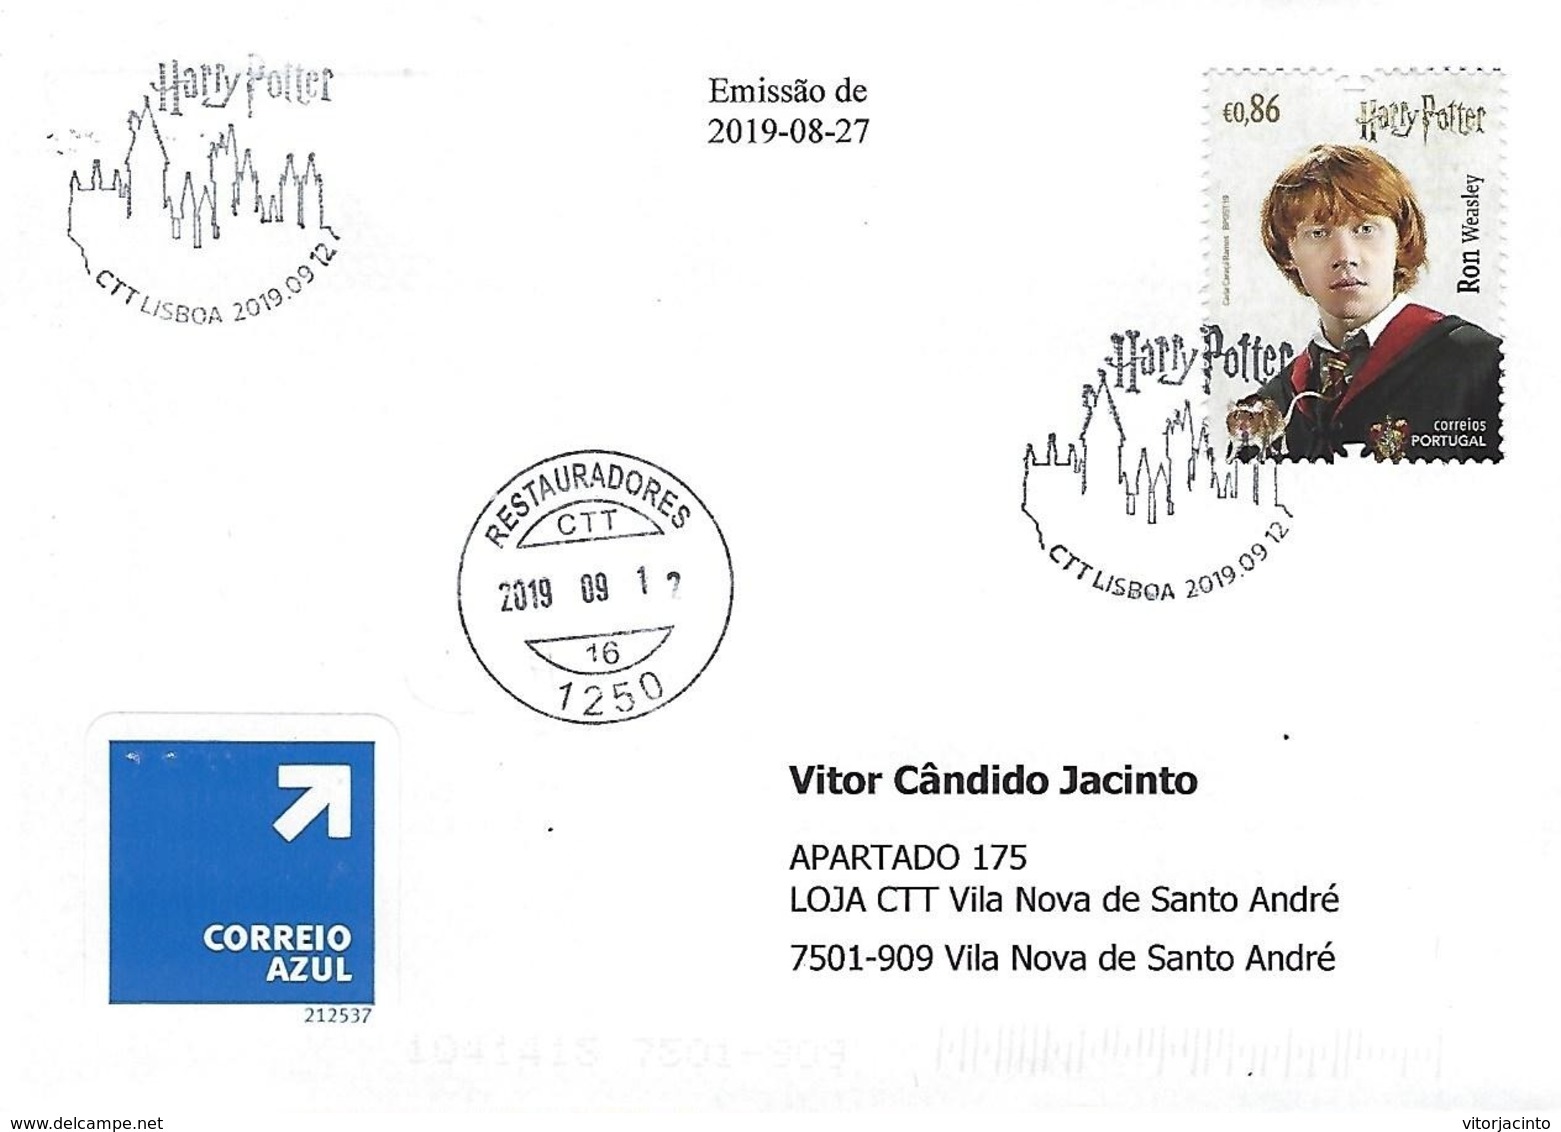 PORTUGAL - Harry Potter 2019 - Commemorative Postmark Above HPotter Stamps ~ Cover Real Circulated ~ - Postmark Collection